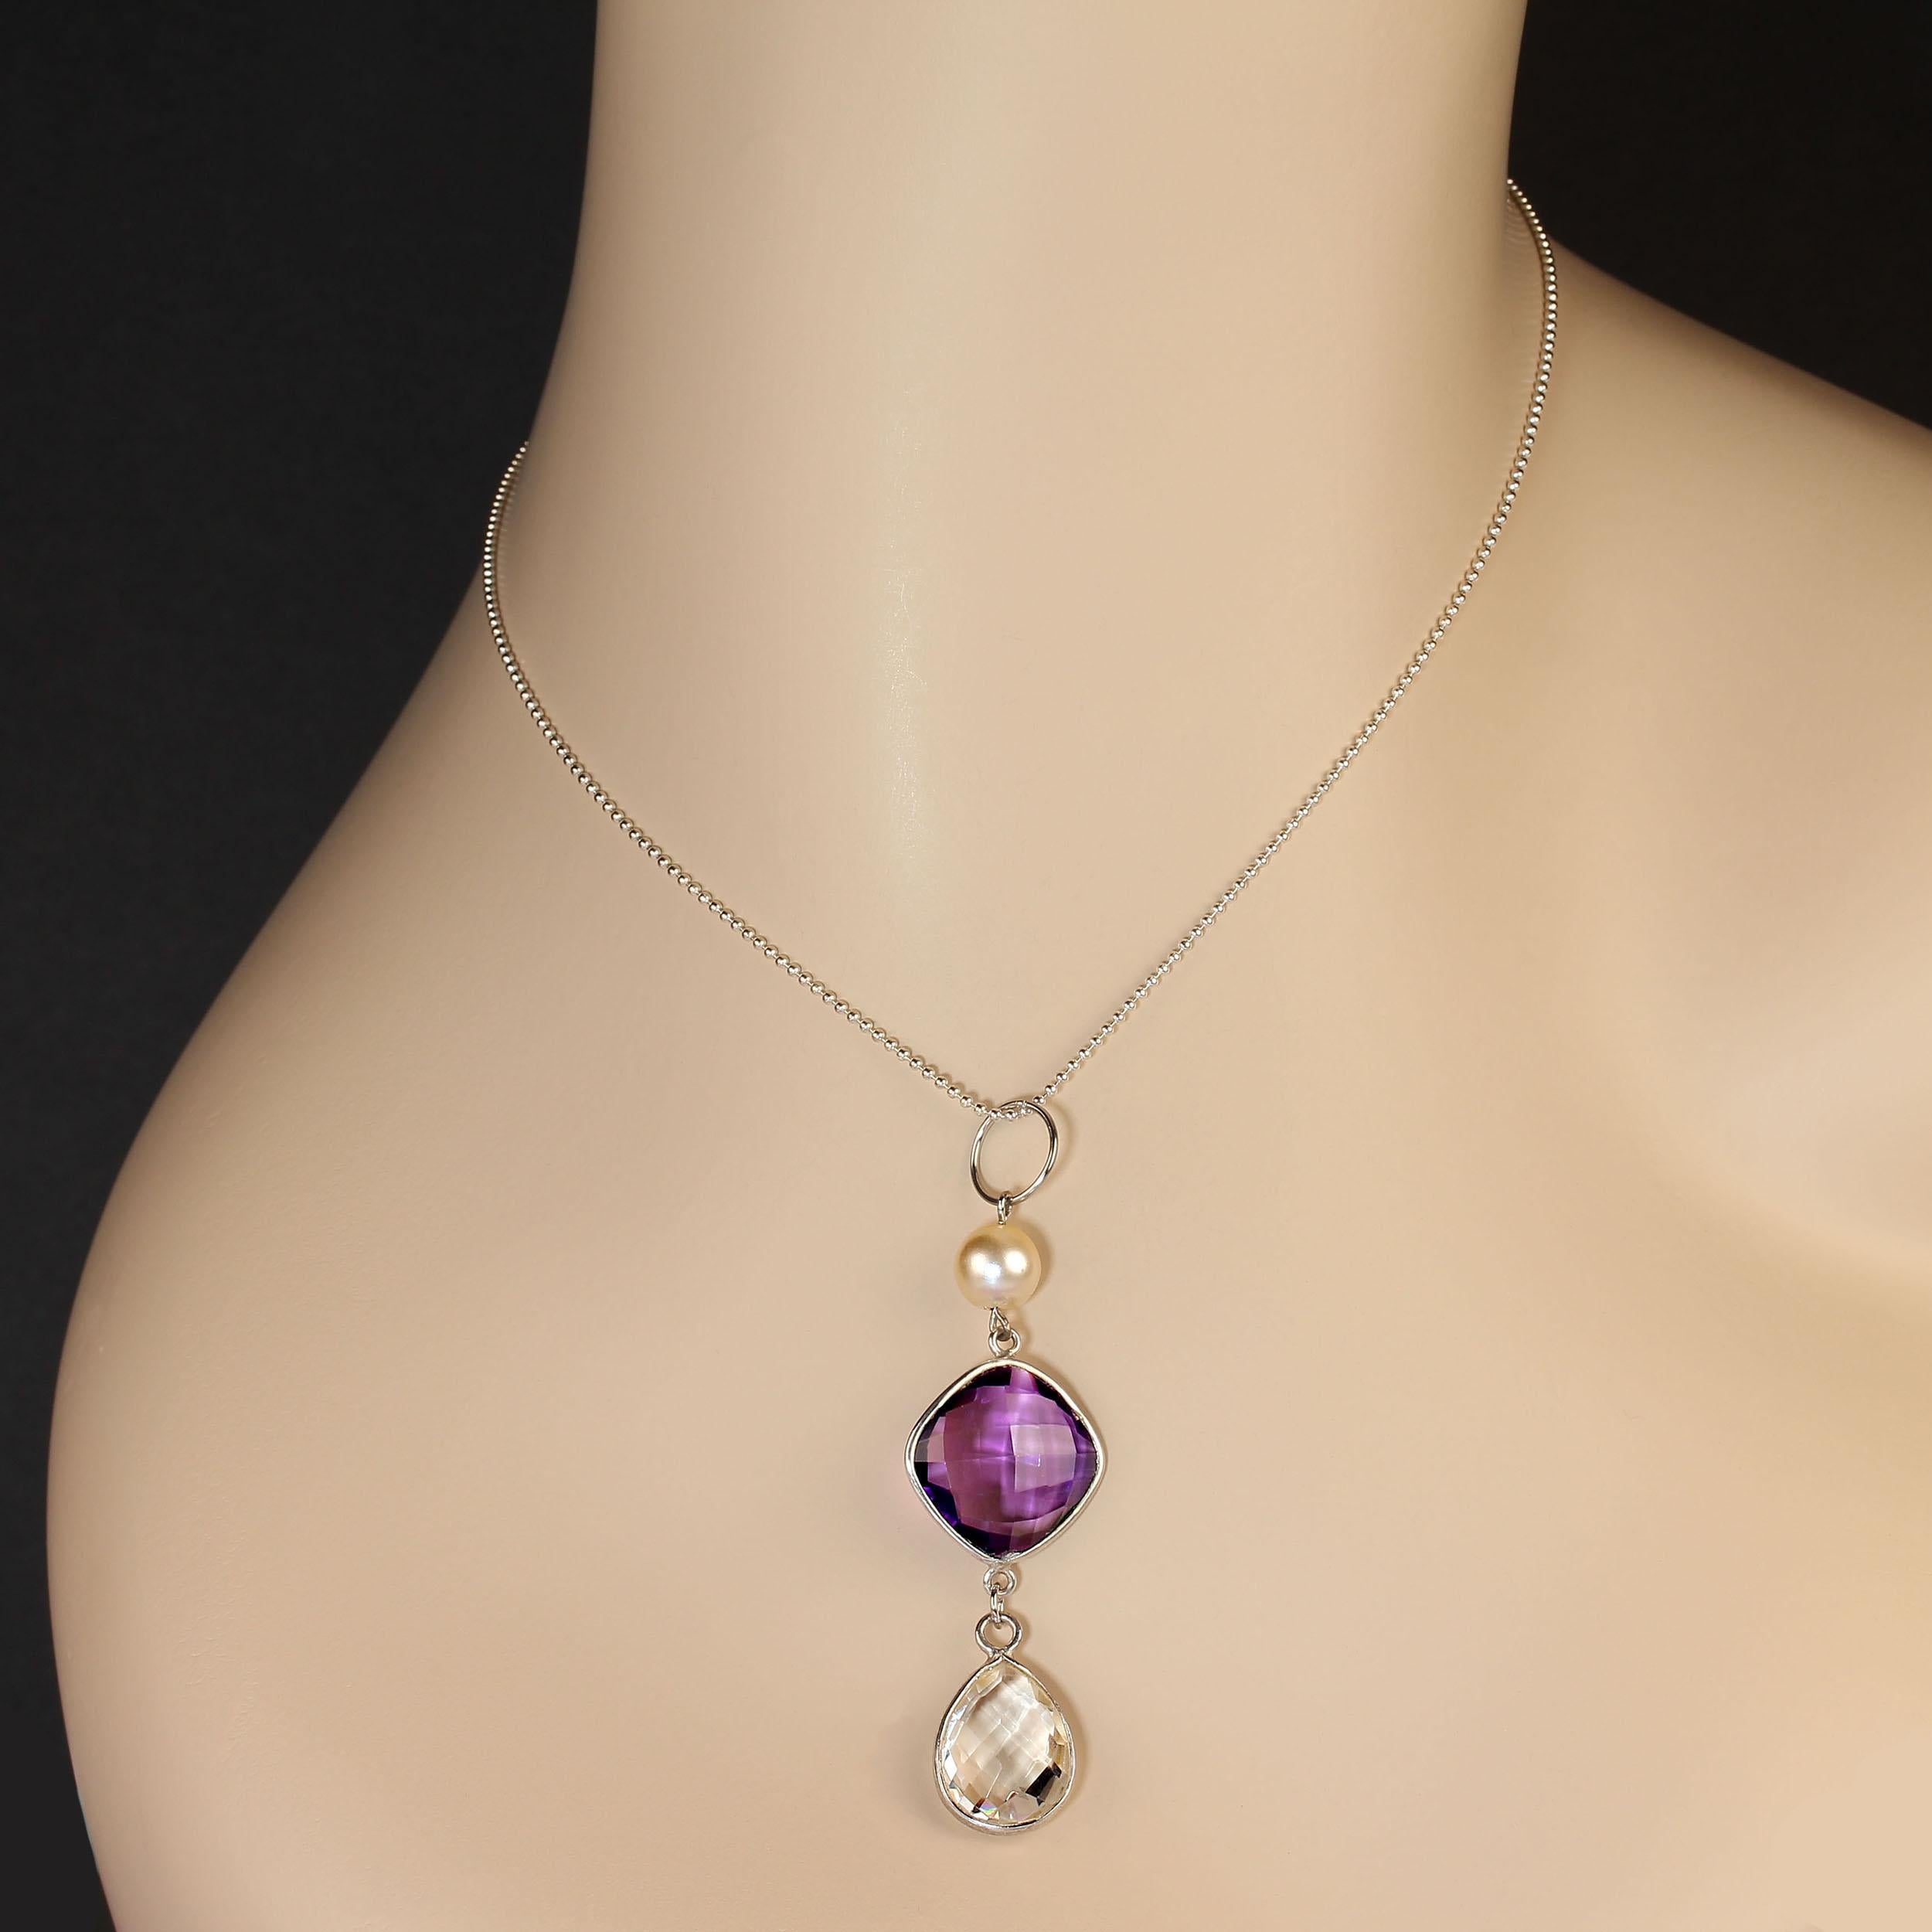 Custom made pendant which features a glowing pearl atop a checkerboard cut amethyst and suspended from that a checkerboard cut quartz crystal! There is lots of movement in this colorful pendant. The stones are bezel set in silver tone and the bail